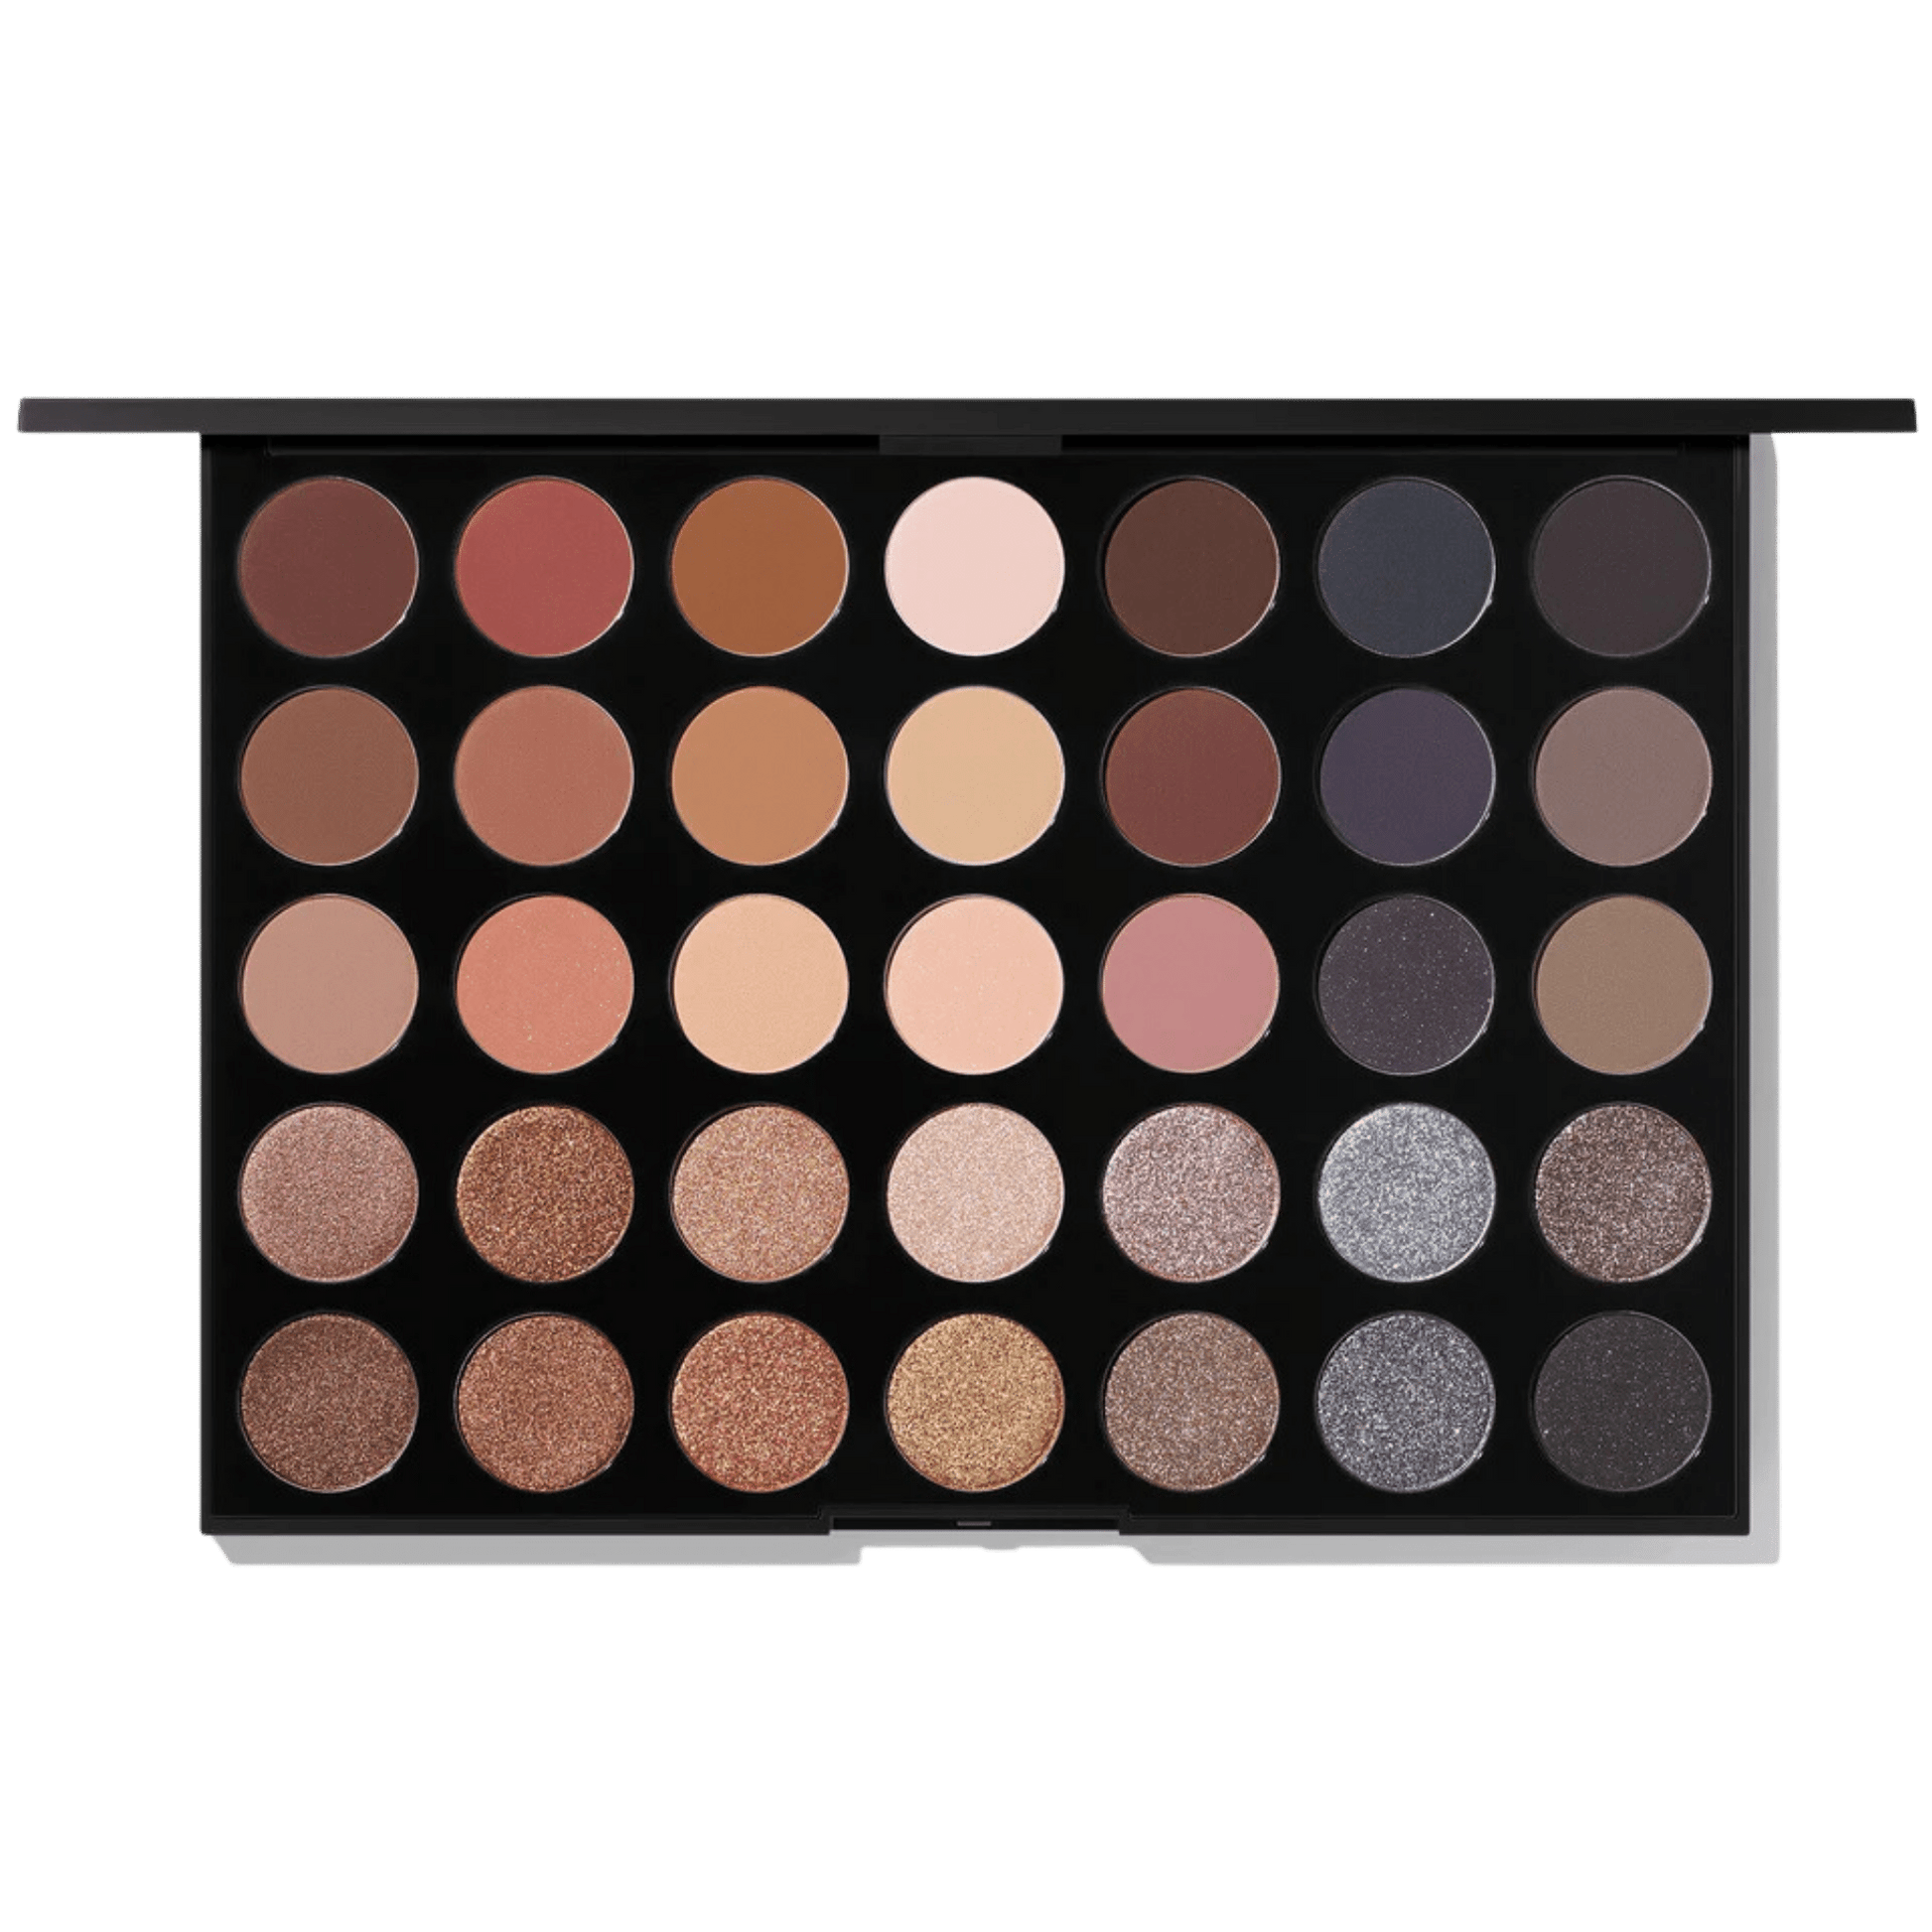 Magic Mirror Artistry Palette Is Now Available At Your Doorstep!